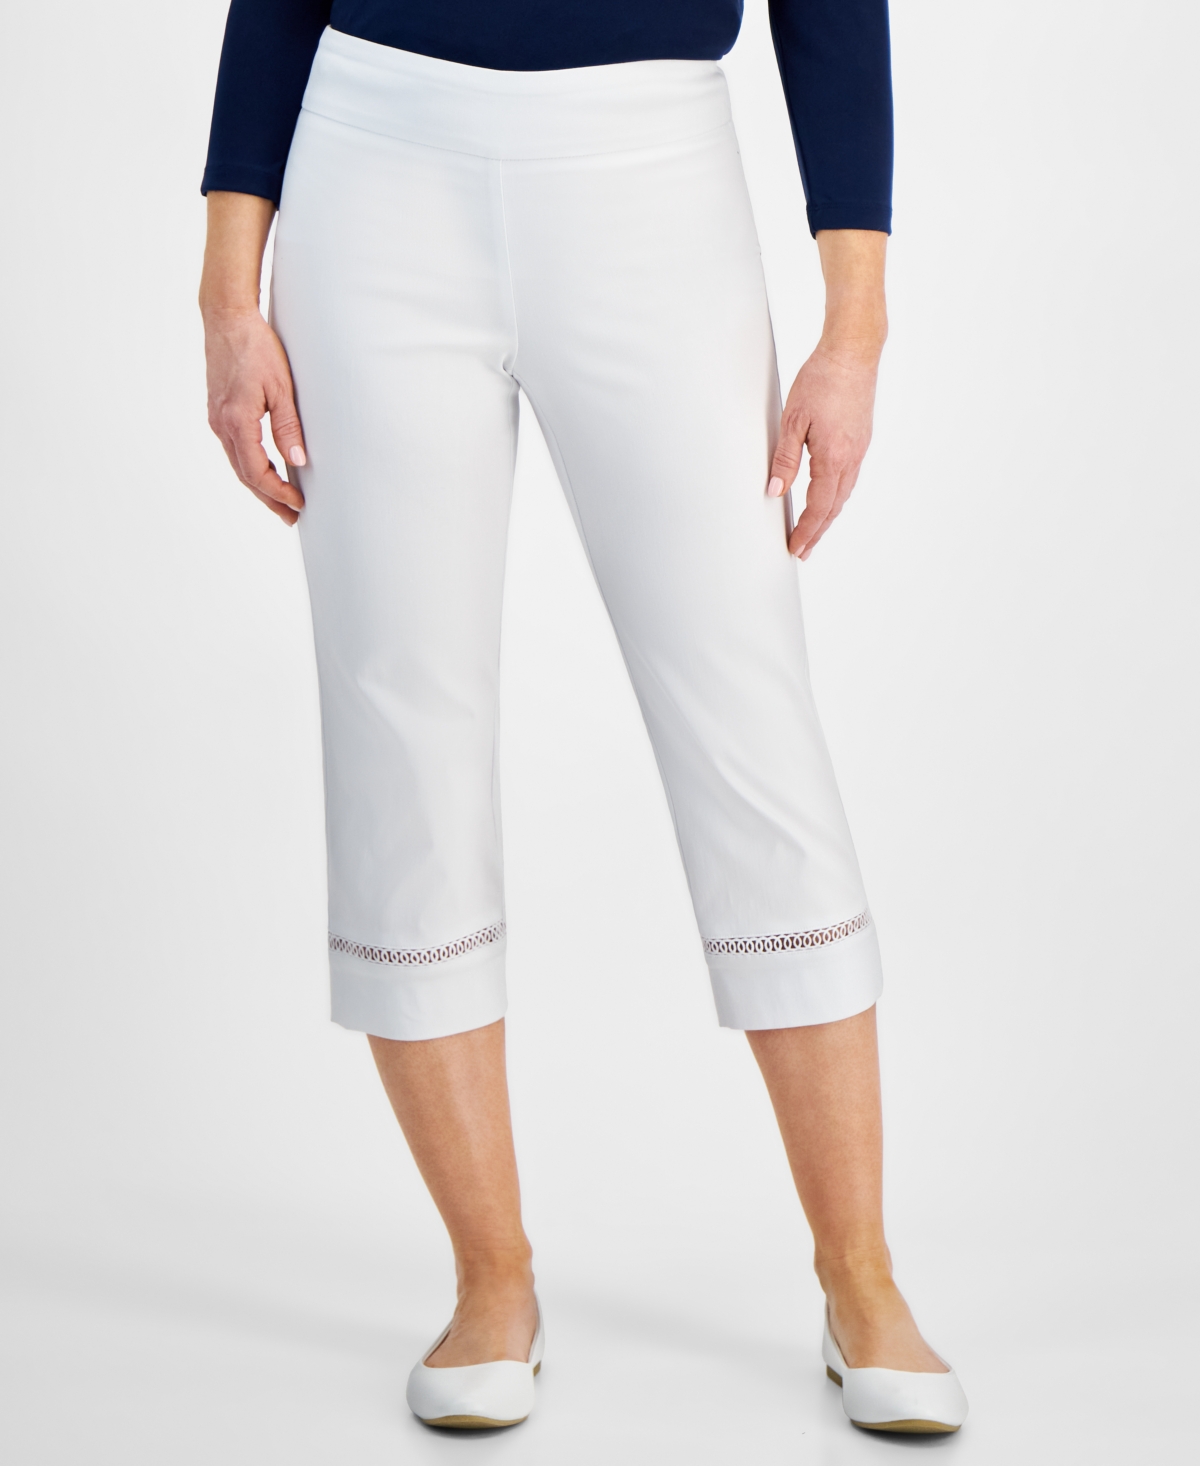 Jm Collection Petite Mid Rise Pull-on Capri Pants, Created For Macy's In Bright White